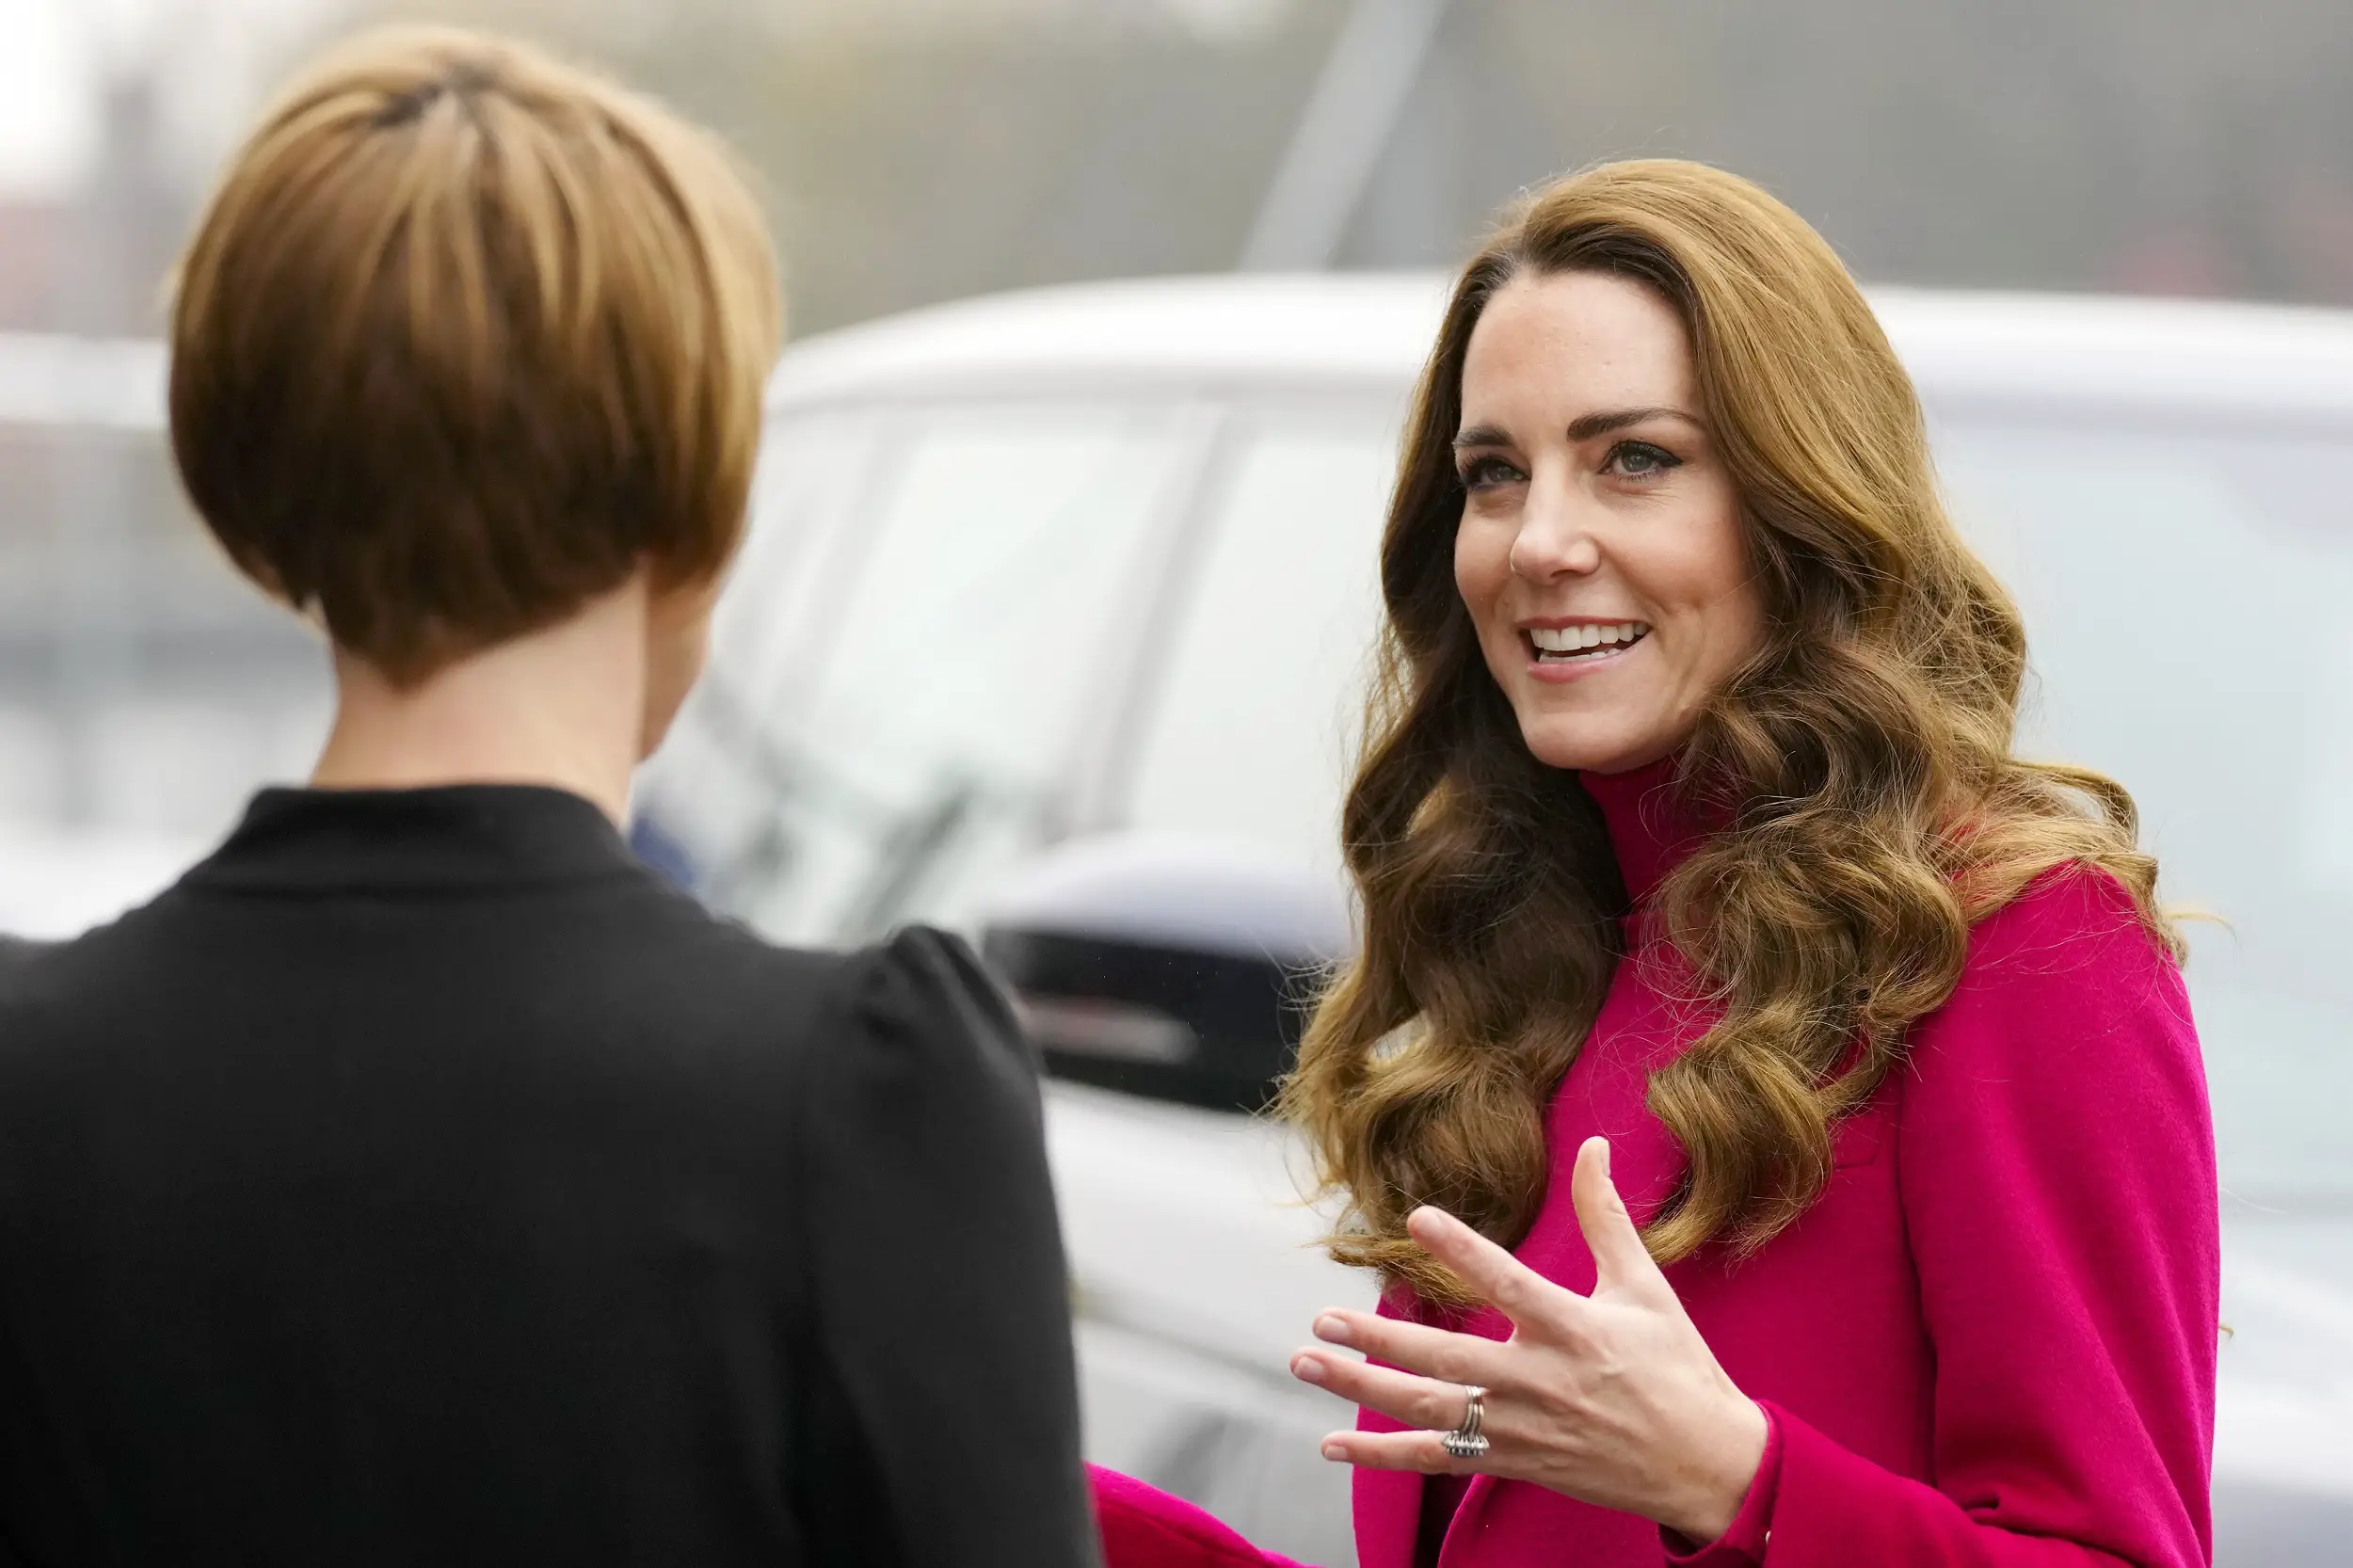 The Duchess of Cambridge visited Nower Hill High School